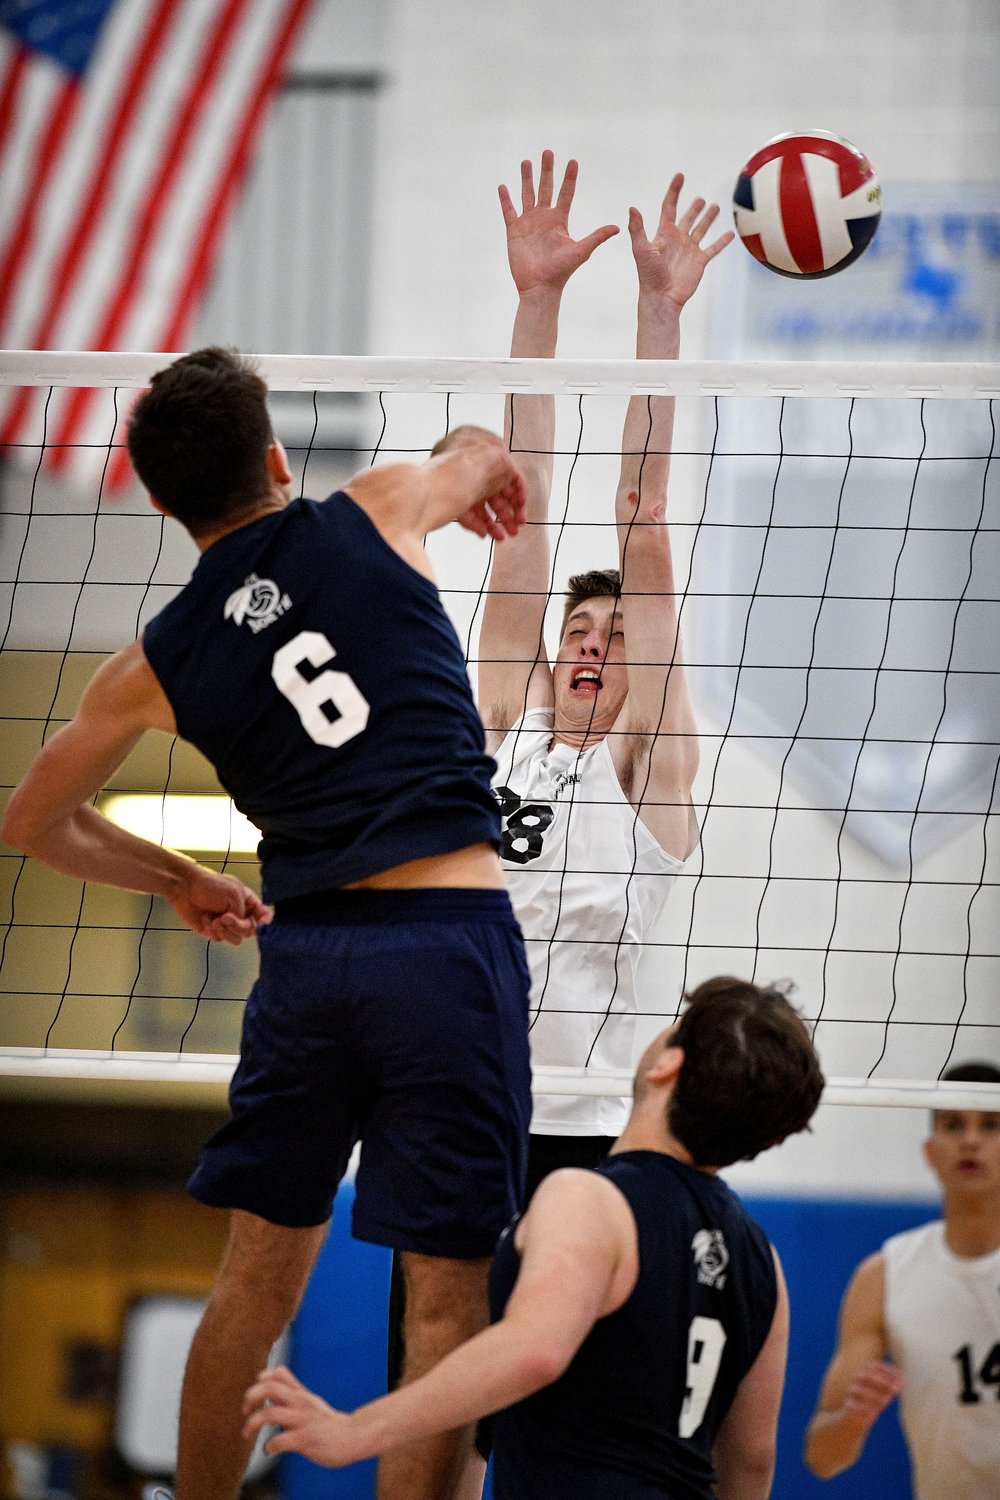 Council Rock North’s Anthony DePalo slams a point past Pennridge’s Nick Smith.